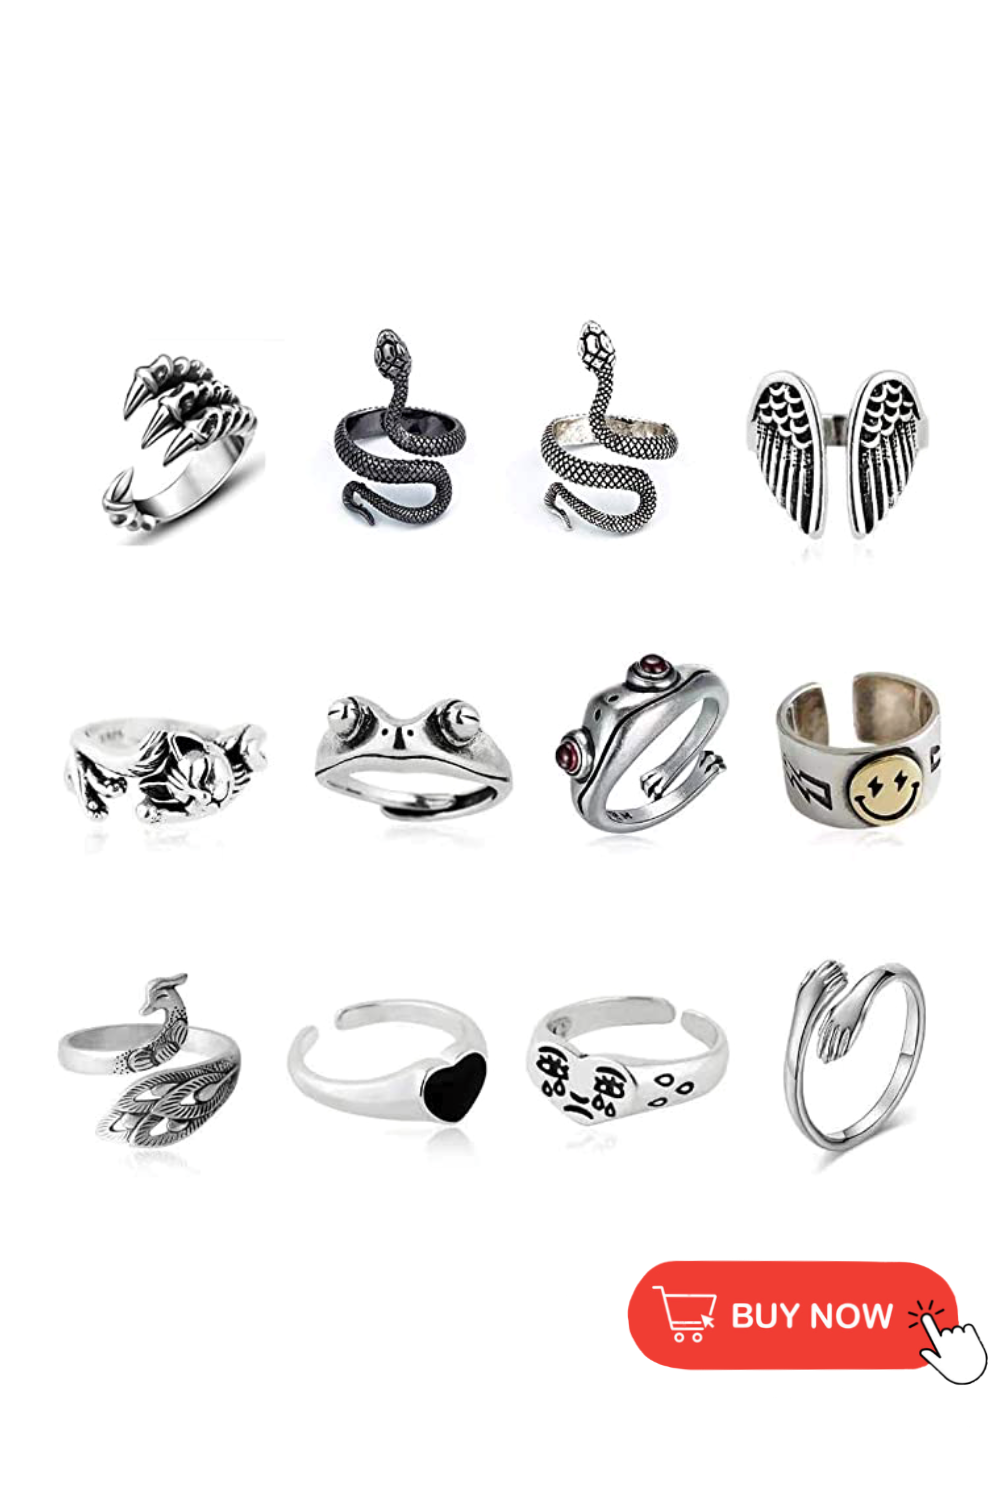 Amazon rings, Wedding ring sheathing, gwen stefani ring, lakers 2020 championship ring, gwen stefani engagement ring, draco malfoy ring,Engagement ring, hematite ring, oura smart ring, moldavite ring, lakers ring, frog ring, anxiety ring, danny green ring, akatsuki rings, ring bomb party, cat noir ring, 14k gold stackable rings, tanzanite rings, white gold black hills gold mens rings, pearl rose gold rings, pearl engagement rings, gold dbl jewelry attractive gems jewelers, jewelry stores open near me, how to clean gold plated jewelry, girls crew jewelry, super bowl 2021, tom brady engagement rings, class rings 2021 ,easter 2021,